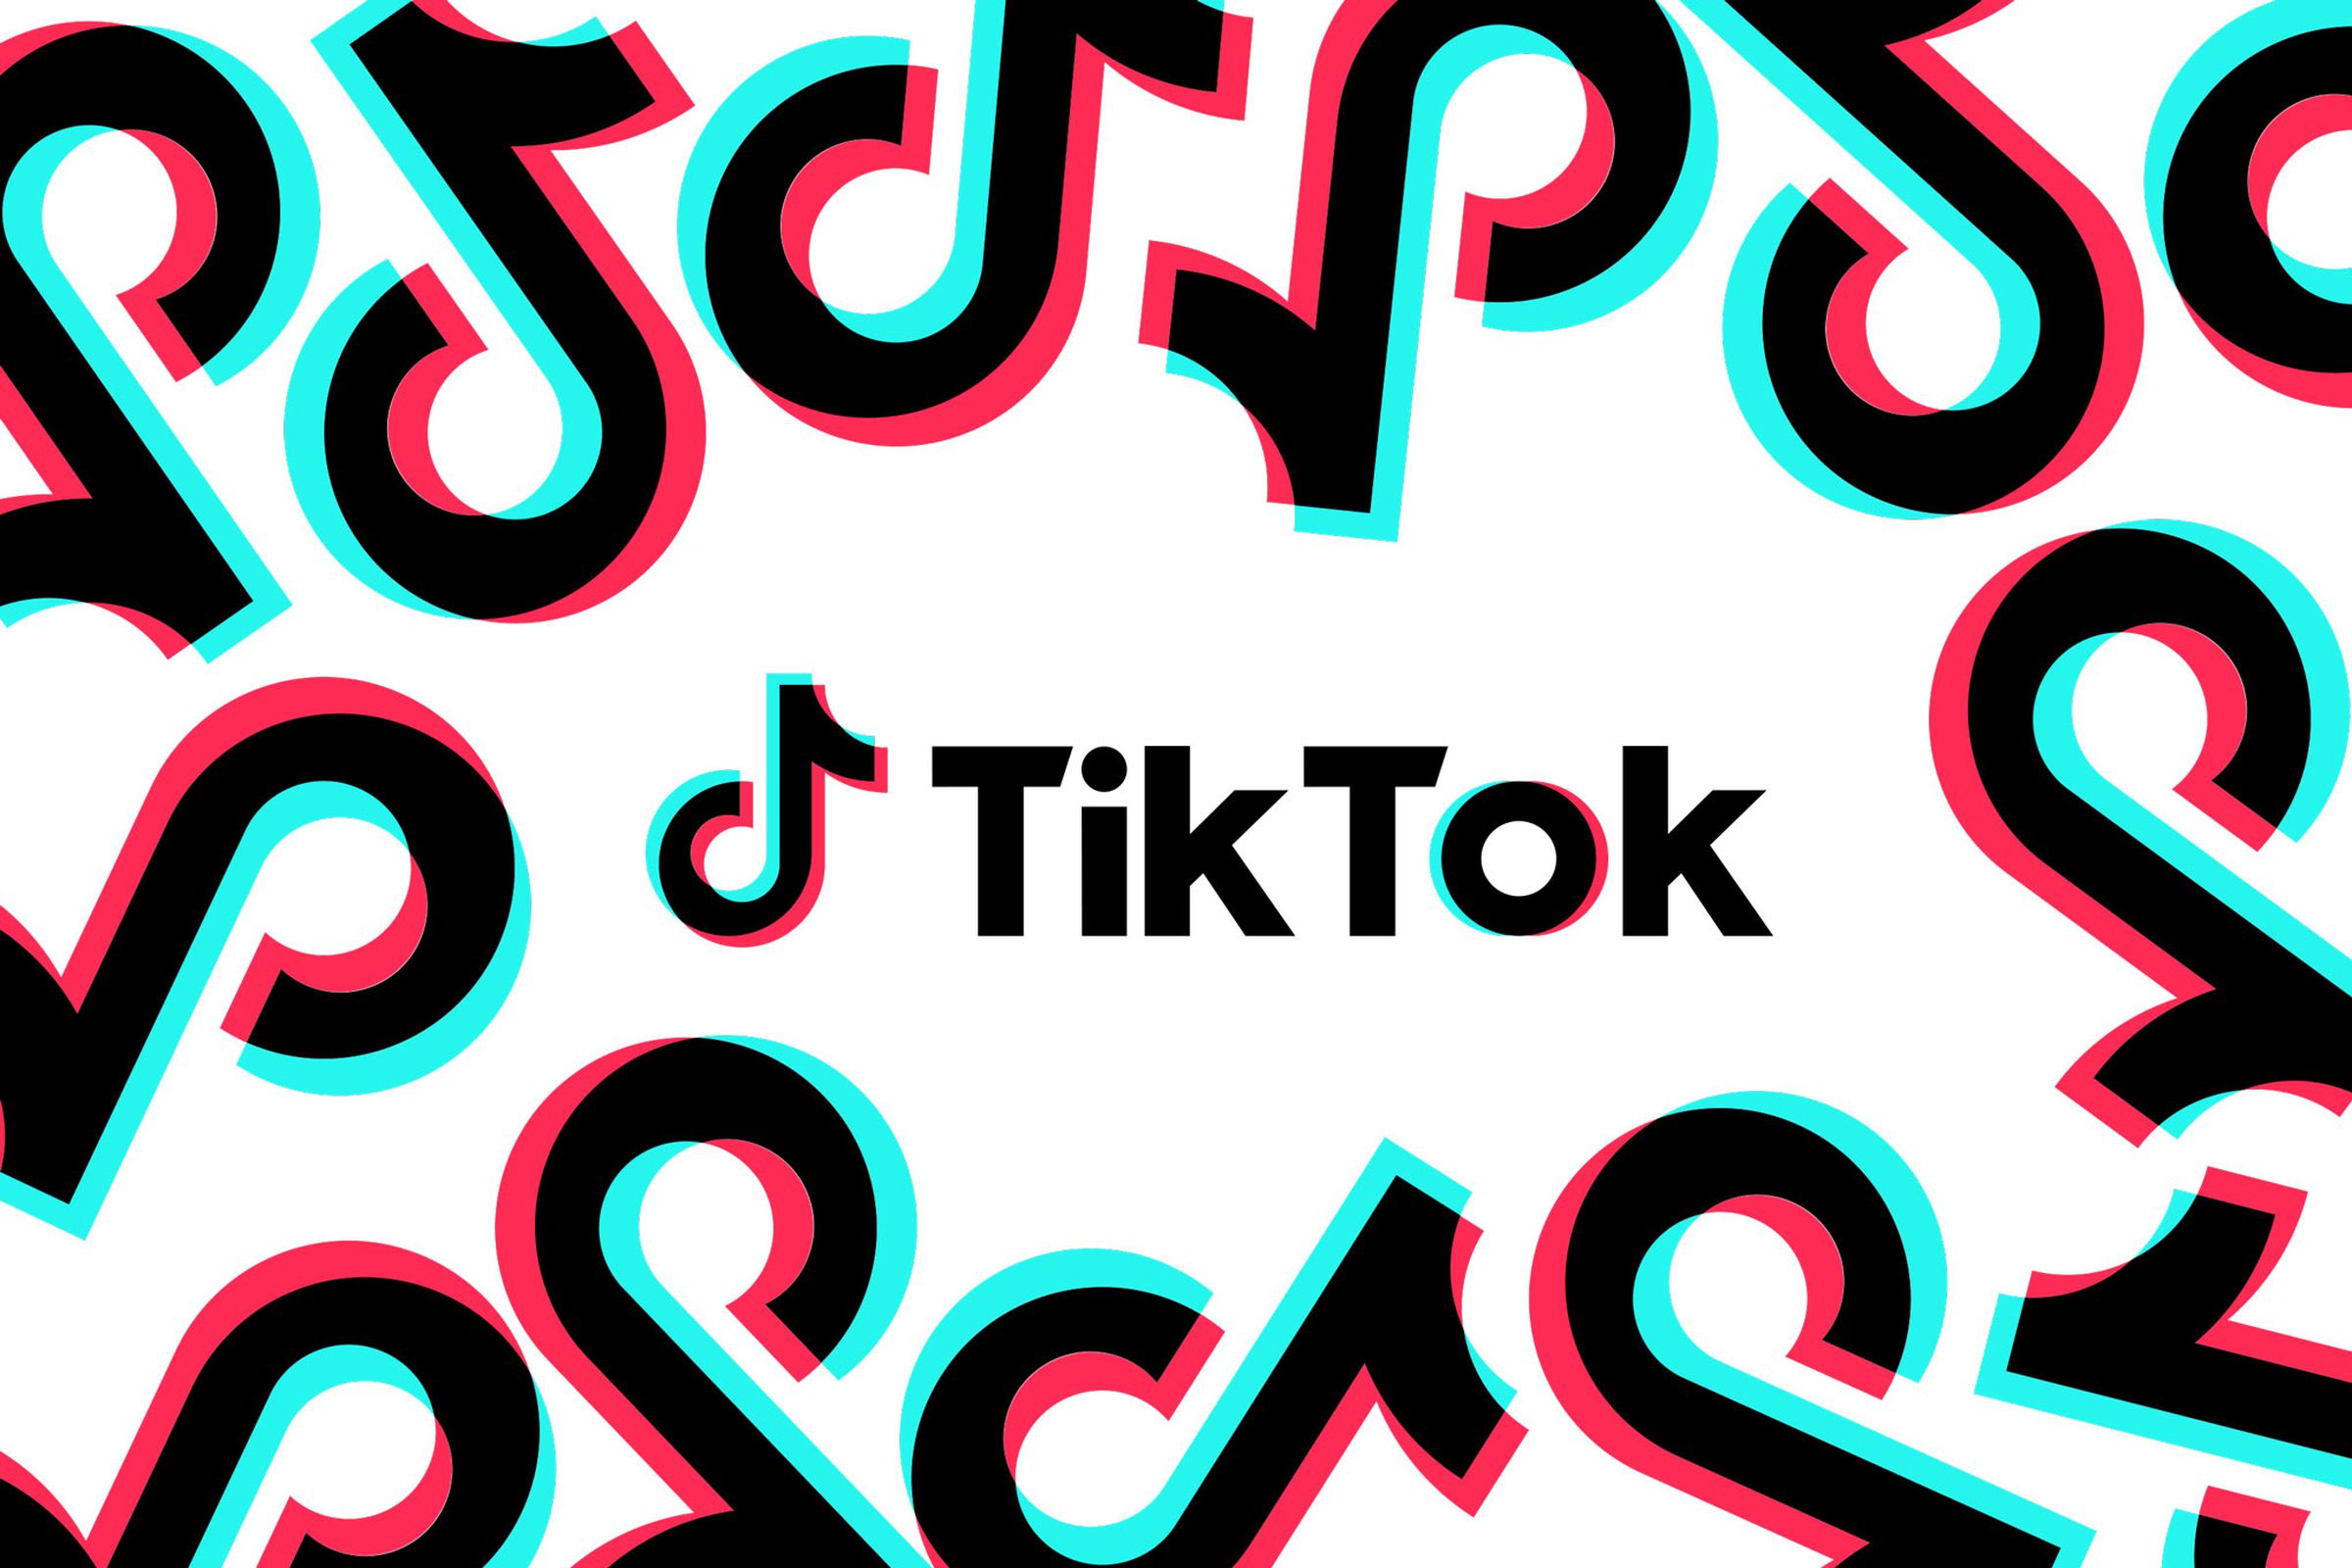 TikTok logo over a white background with the app icon repeating